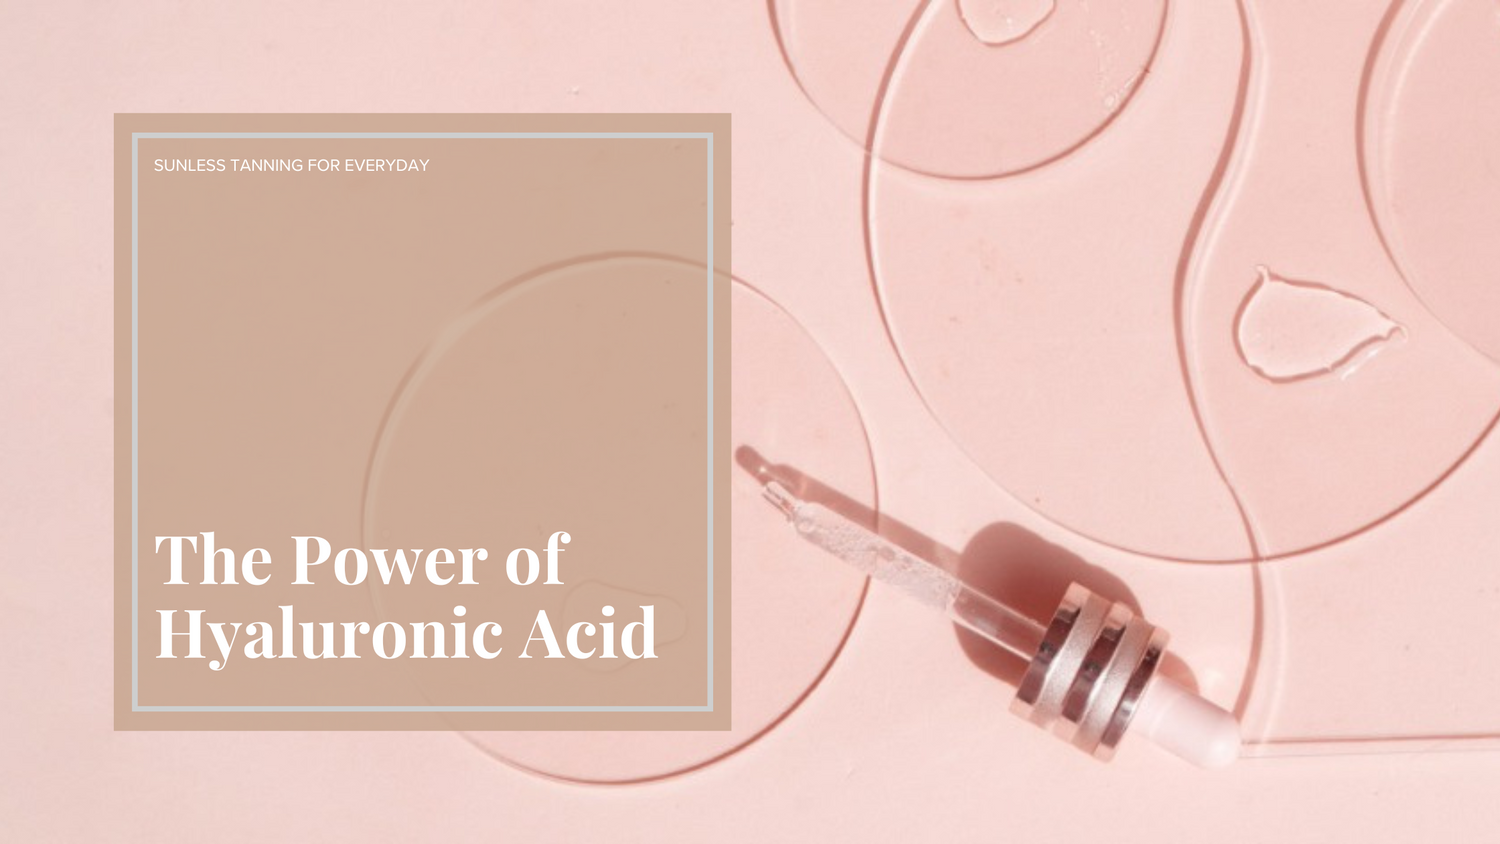 The Power of Hyaluronic Acid